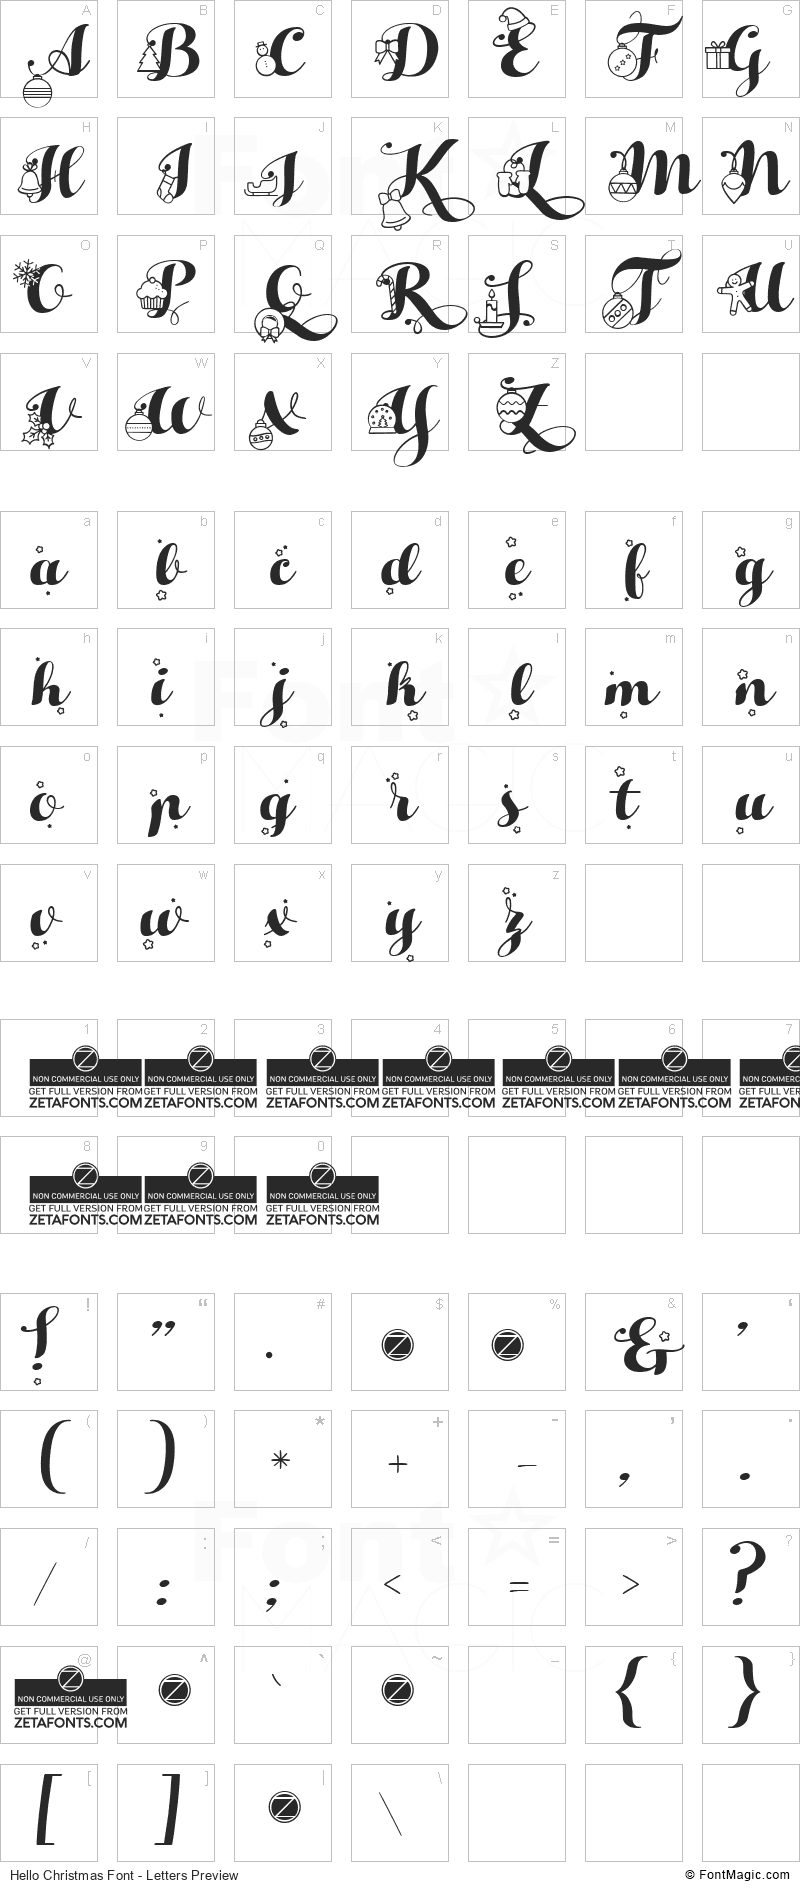 Hello Christmas Font - All Latters Preview Chart